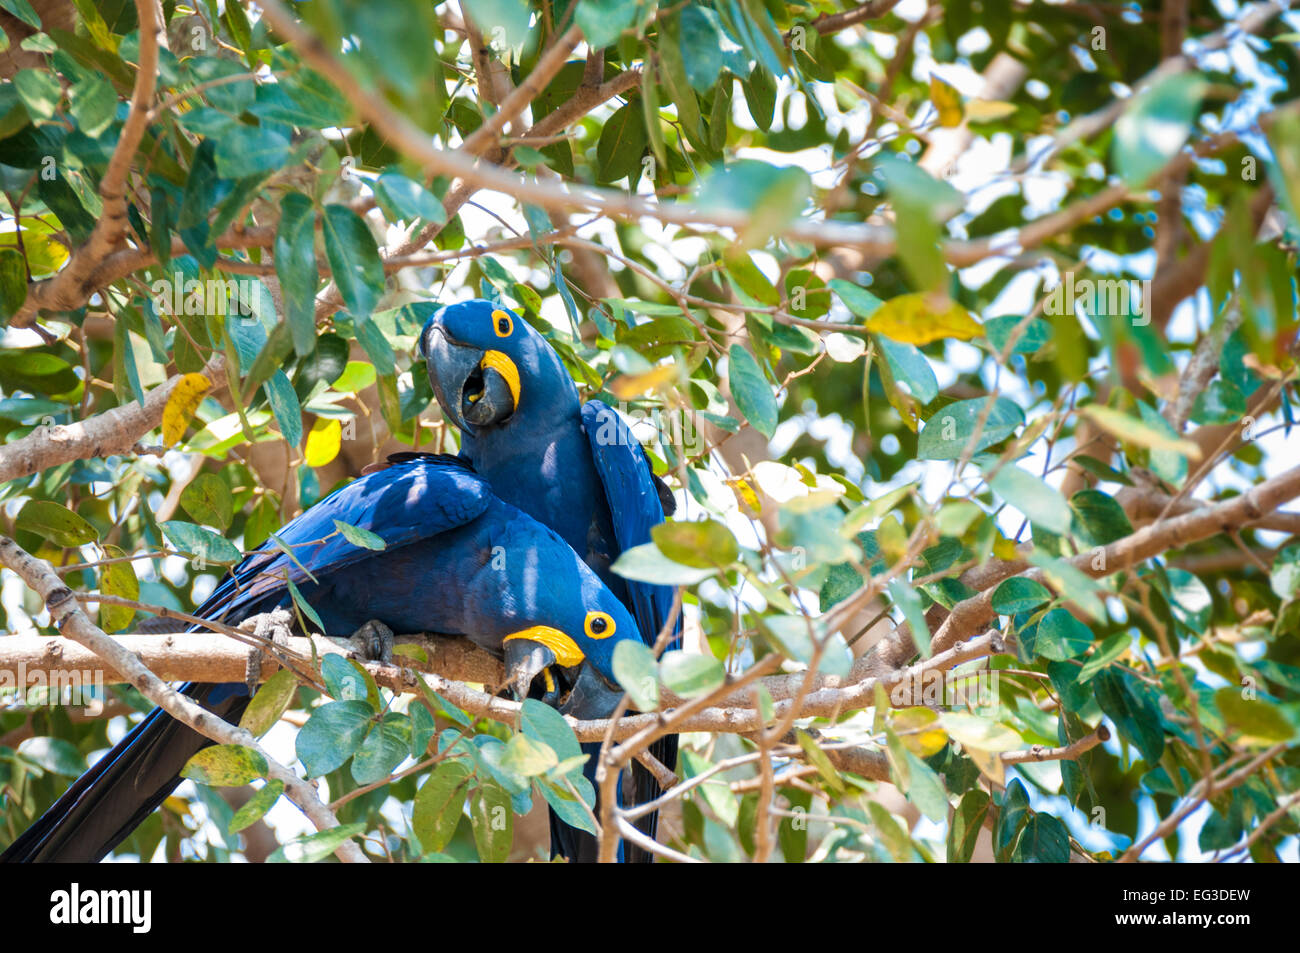 A Pair of  Hyacinth Macaws, Anodorhynchus hyacinthinus, perched in a tree, Pantanal, Mato Grosso, Brazil, South America Stock Photo